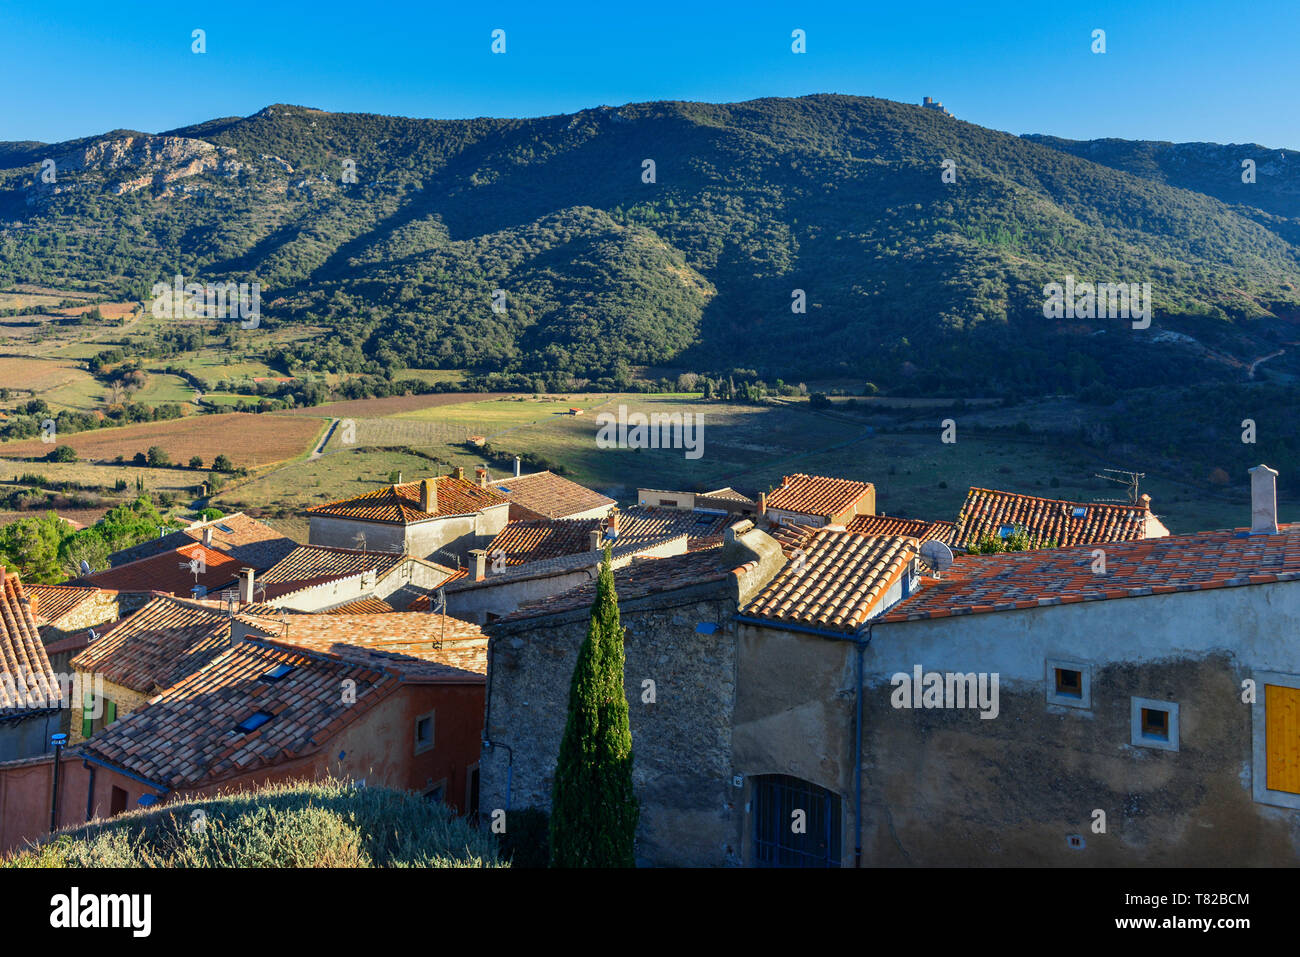 The village of Cucugnan in the French Pyrenees Orientales. This view looks towards the ruins of the medieval Chateau Queribus. Stock Photo